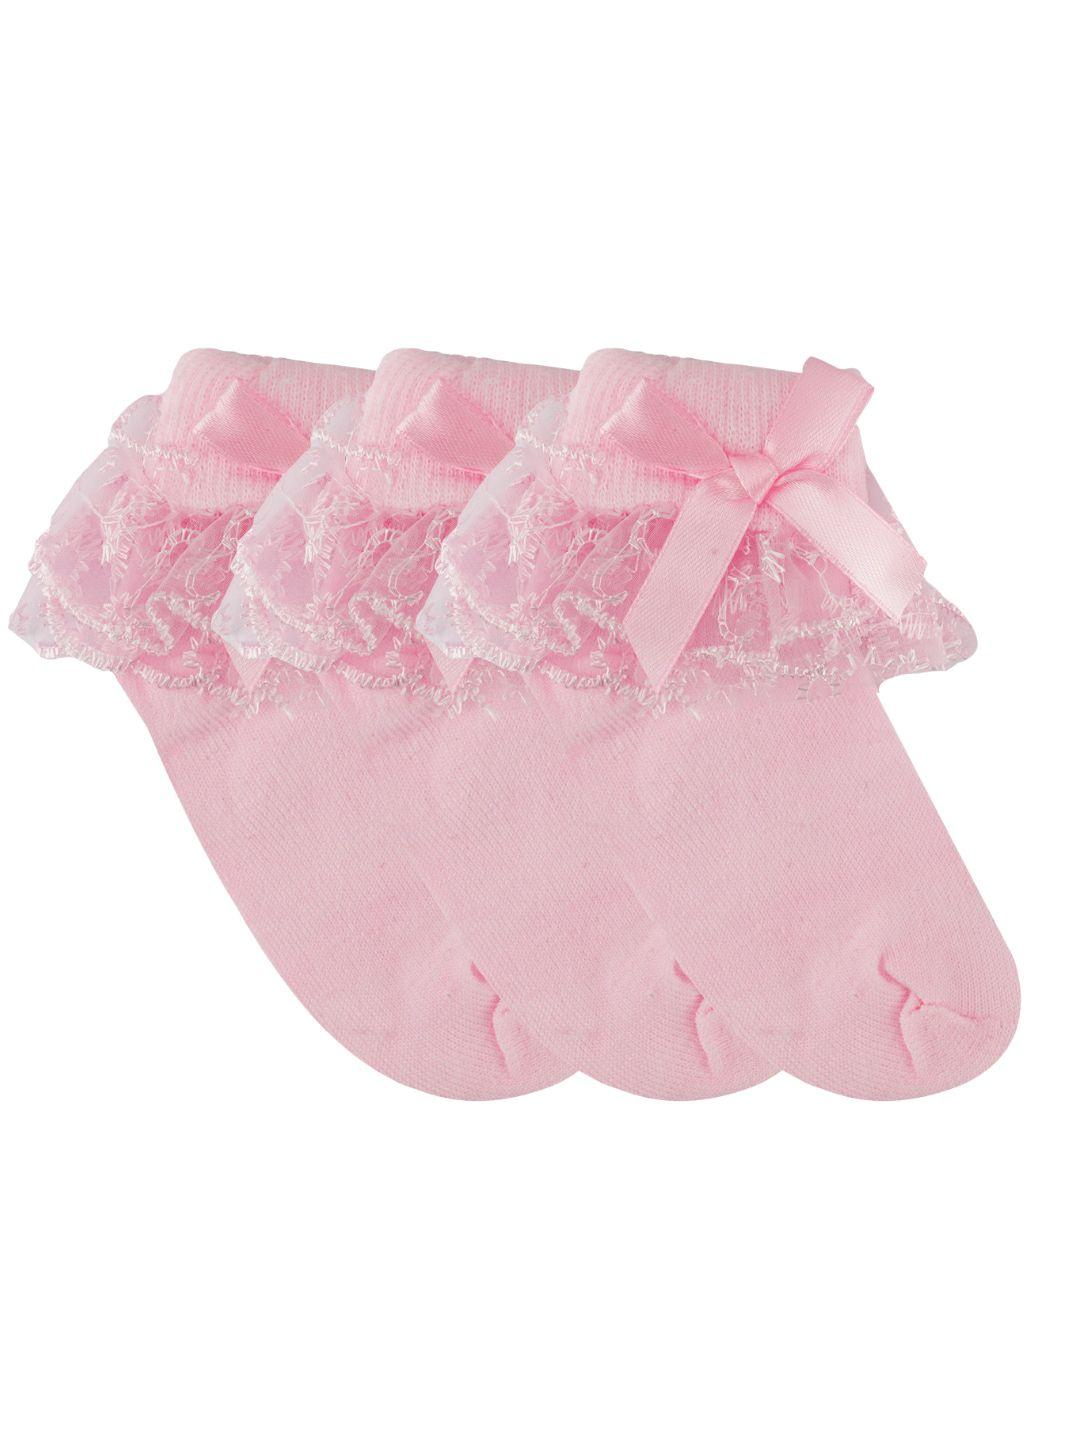 n2s next2skin pack of 3 girls pink cotton socks with frills